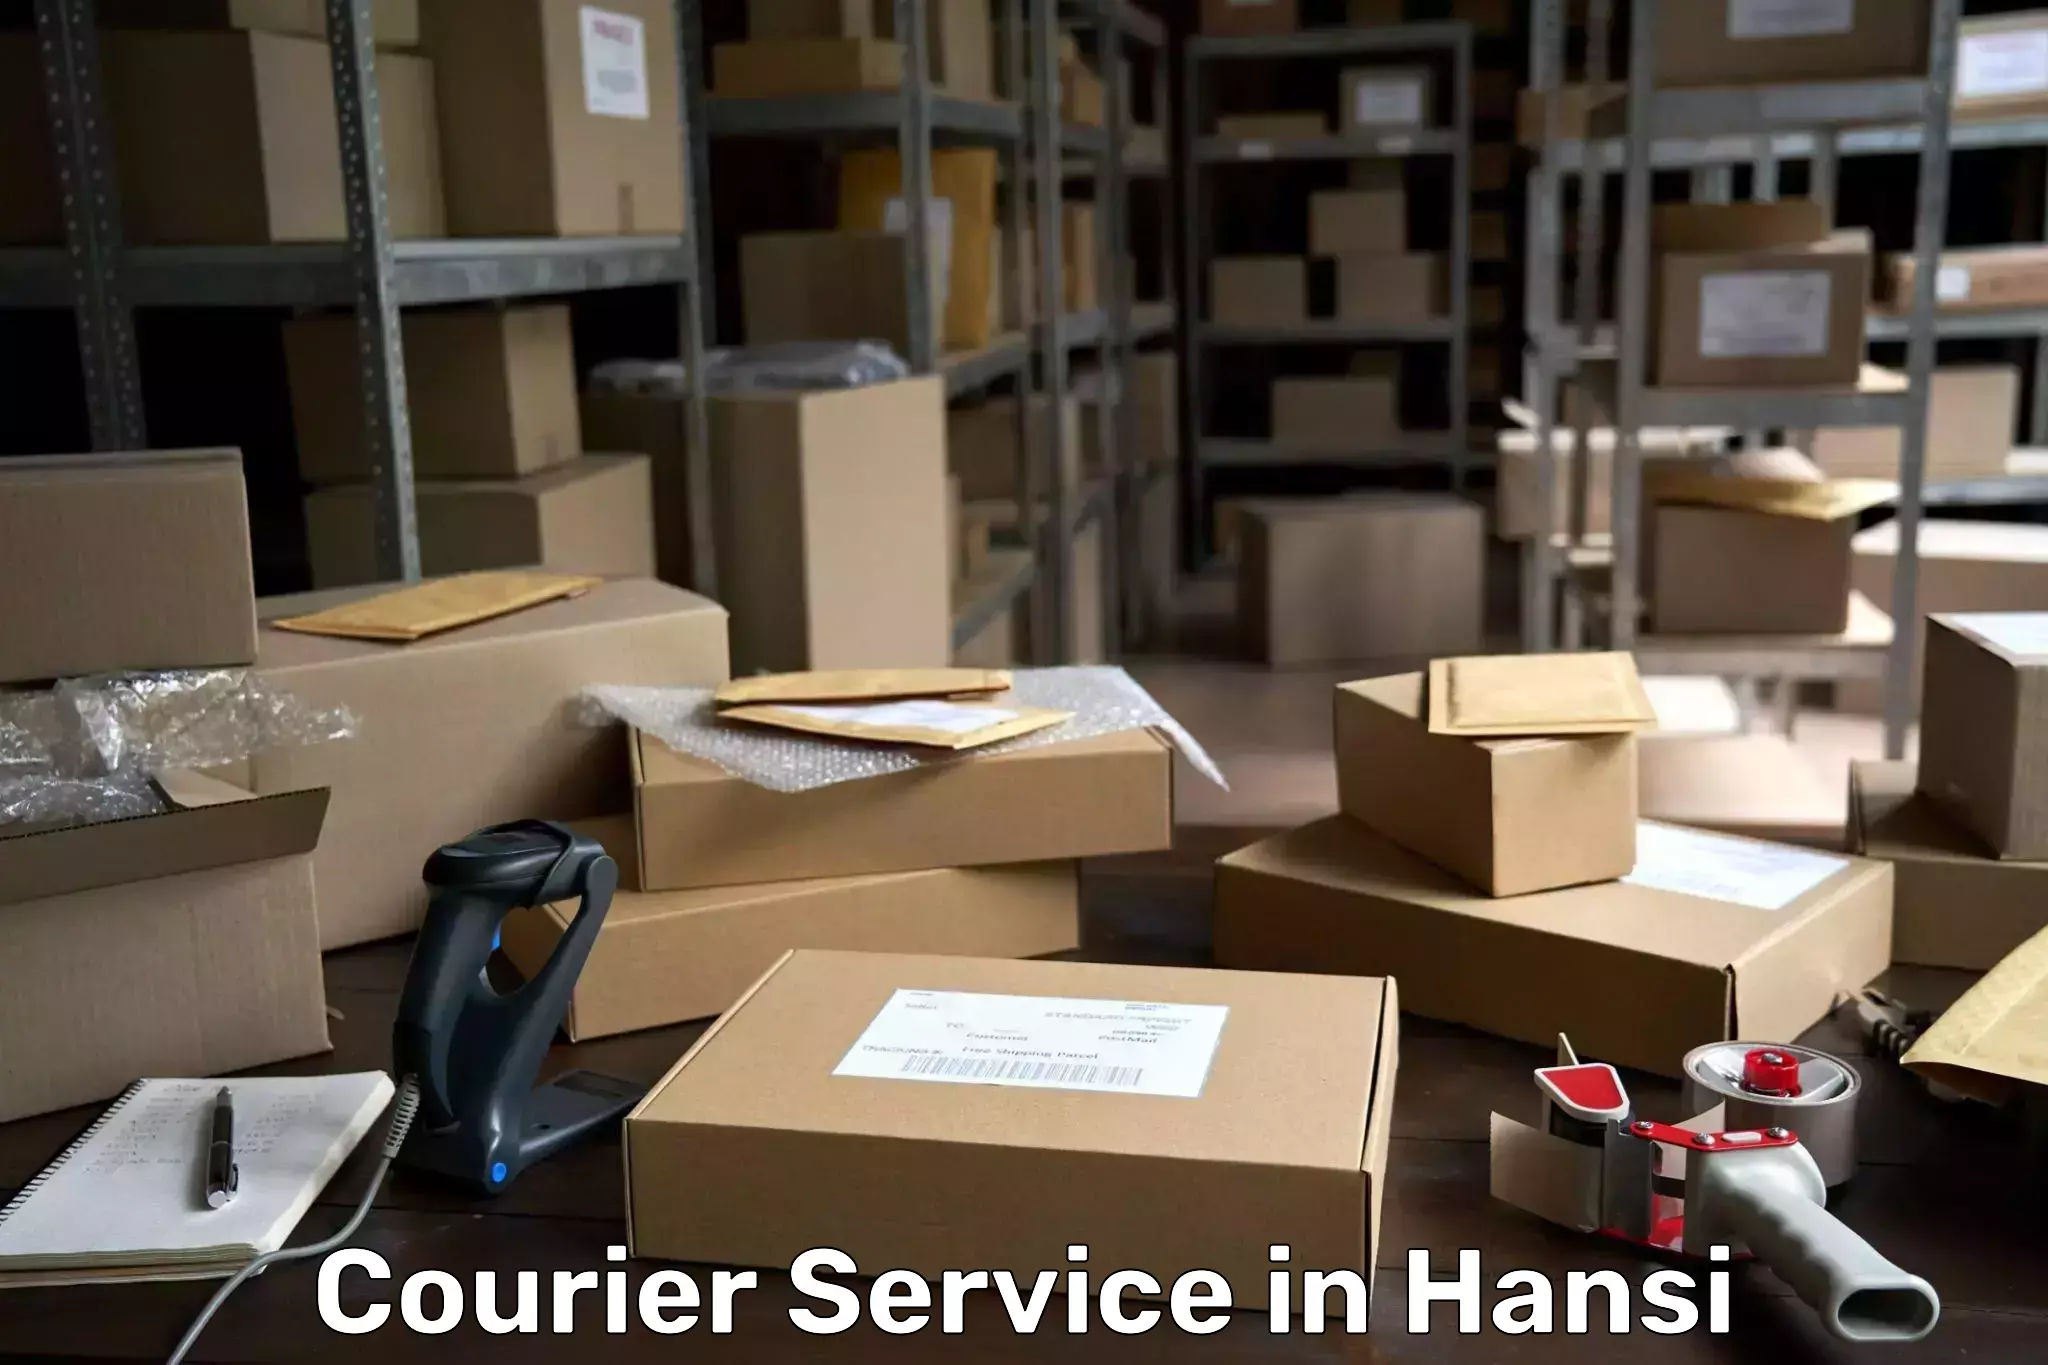 Nationwide shipping capabilities in Hansi